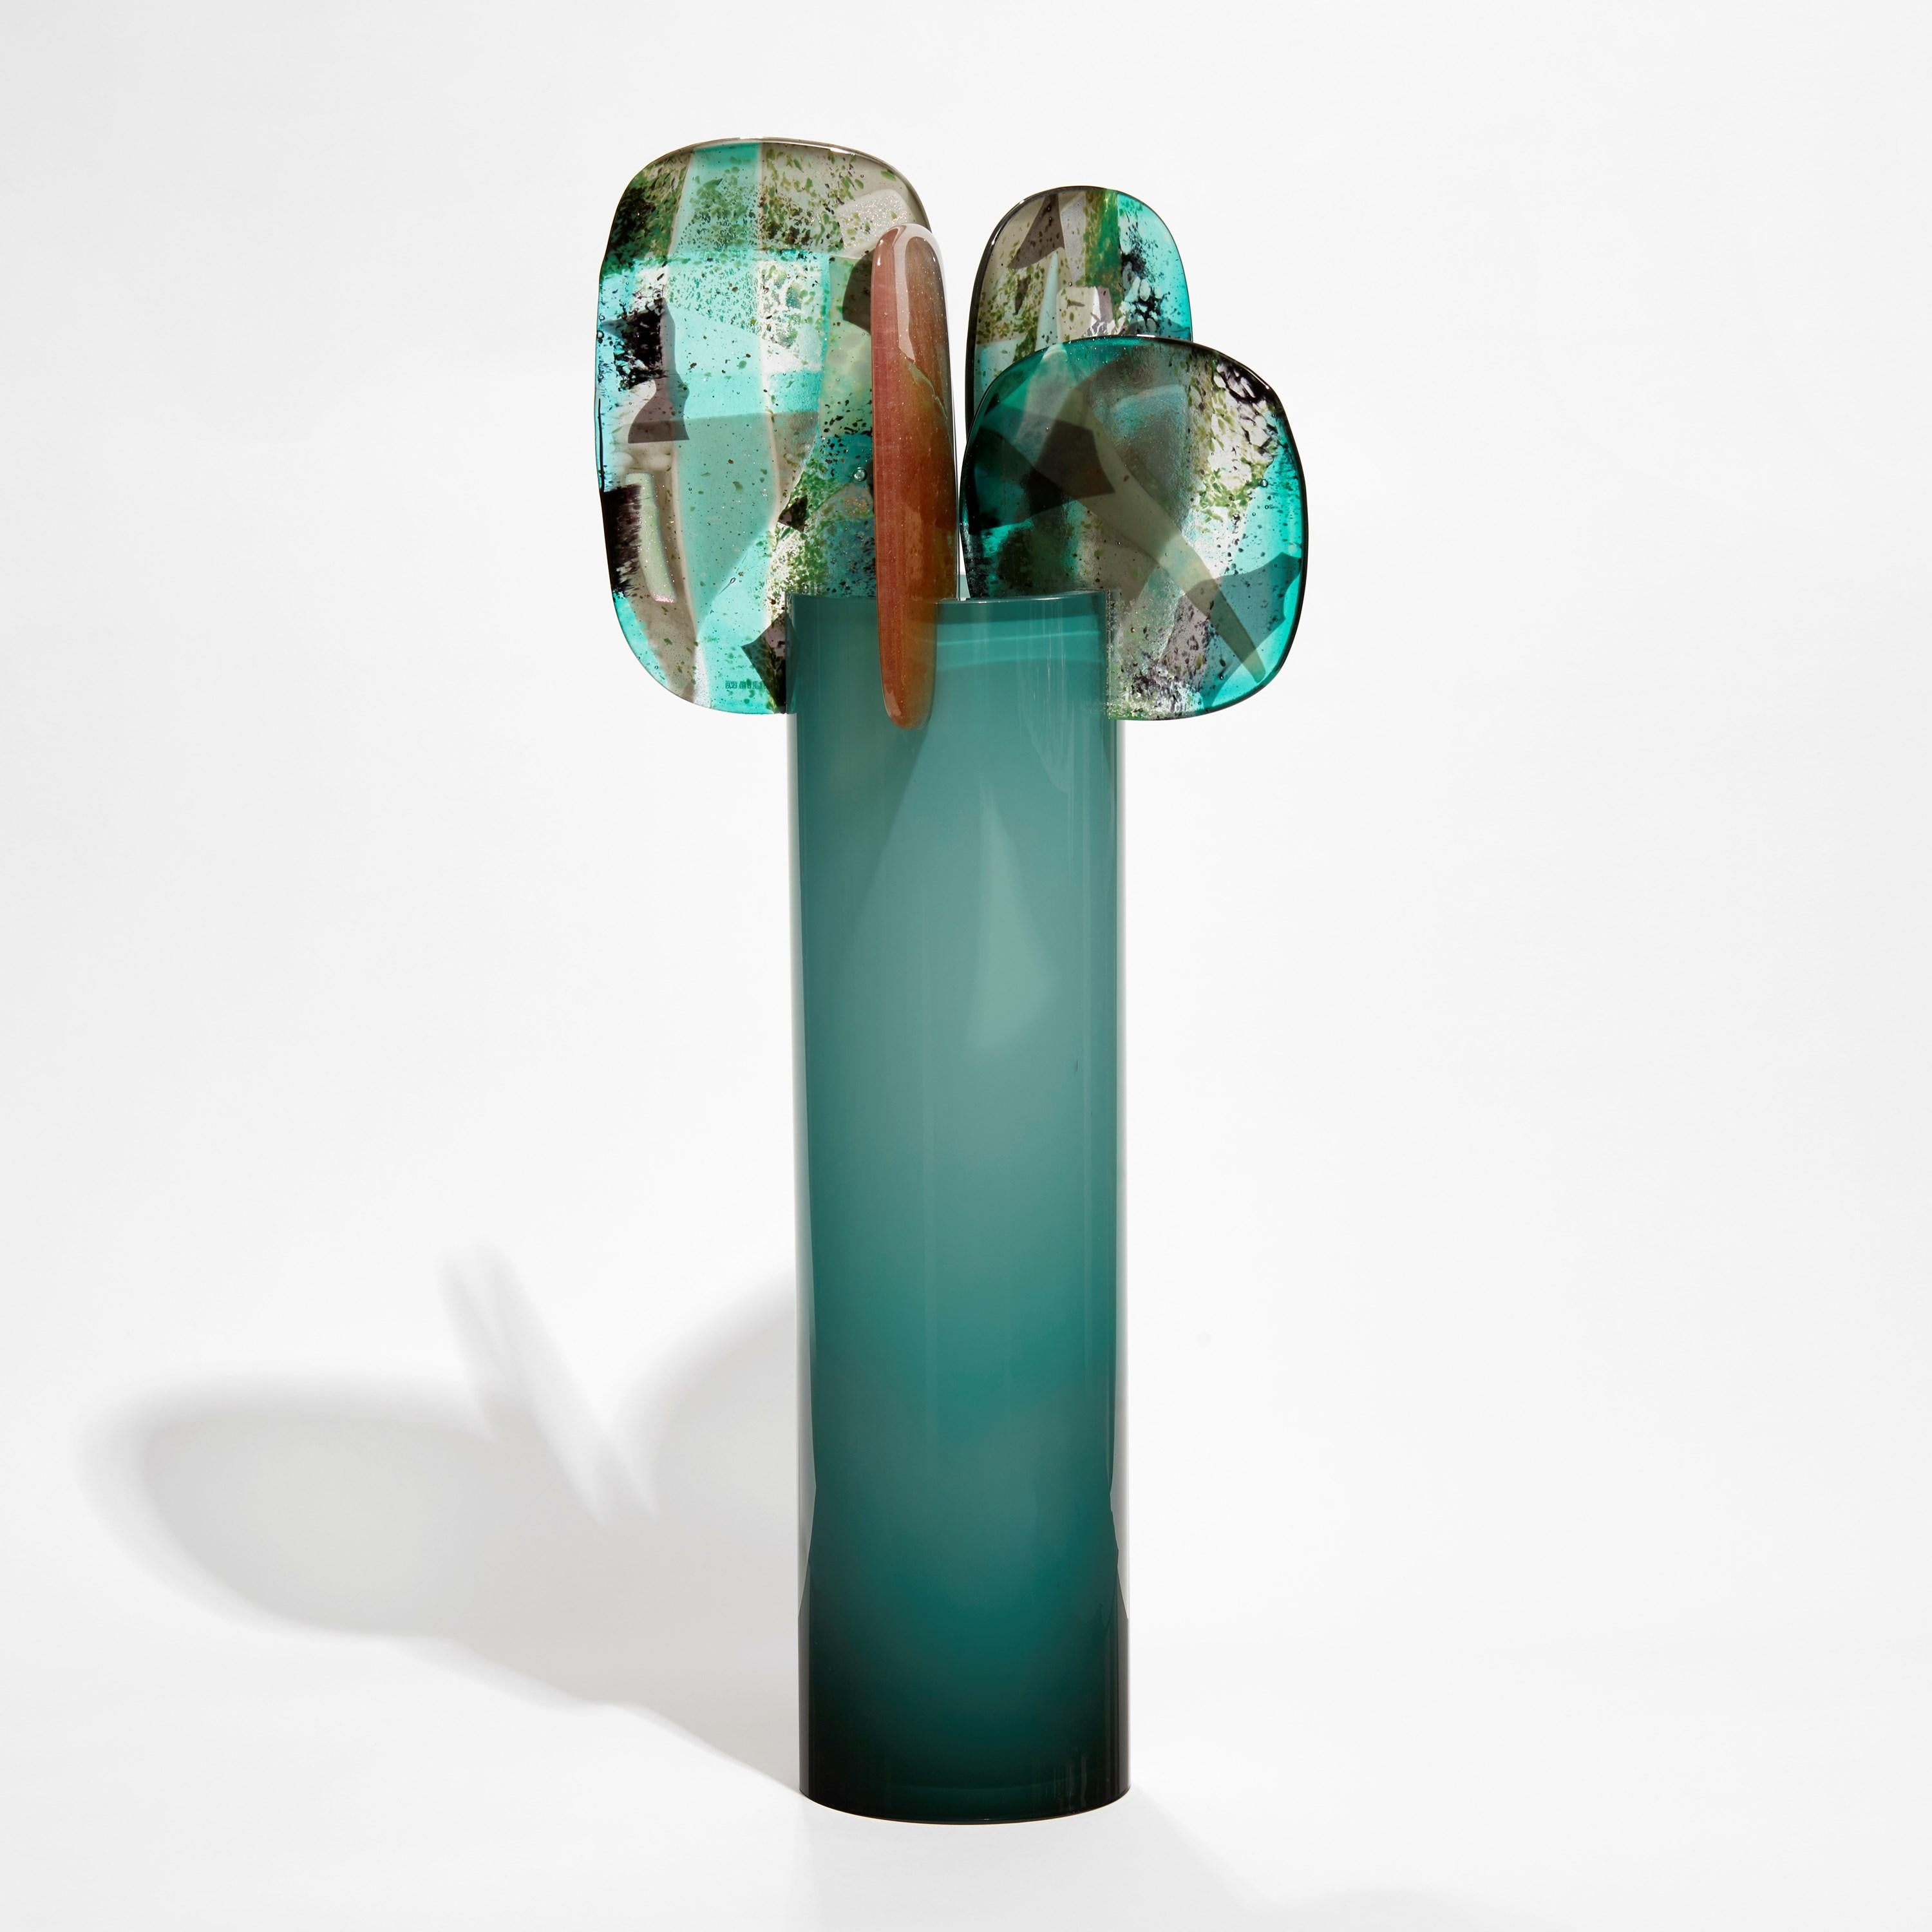 'Paradise 03 in Teal' is a unique teal green and pink glass sculpture created using hybrid hand-made glass techniques by the British artist Amy Cushing. Combining mouth blown glass with kiln formed glass, each piece within the collection displays a